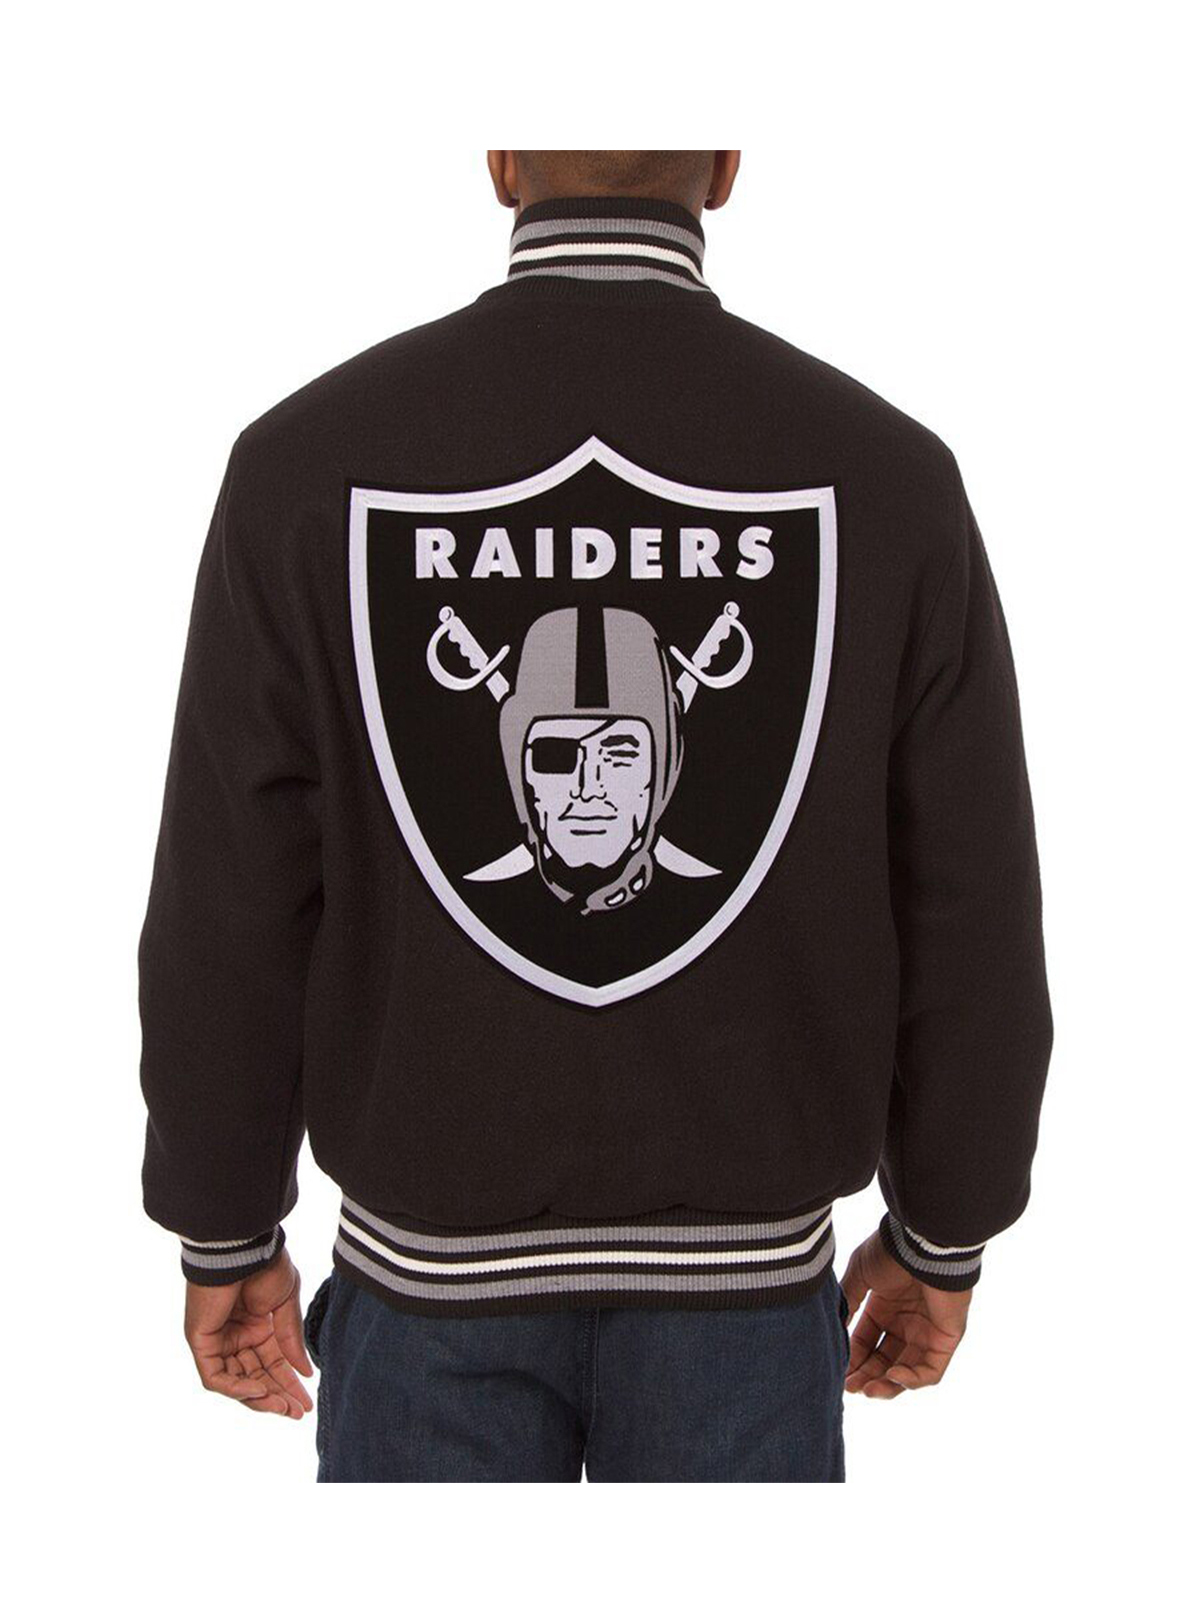 Oakland Raiders JH Design Brown Embroidered Jacket